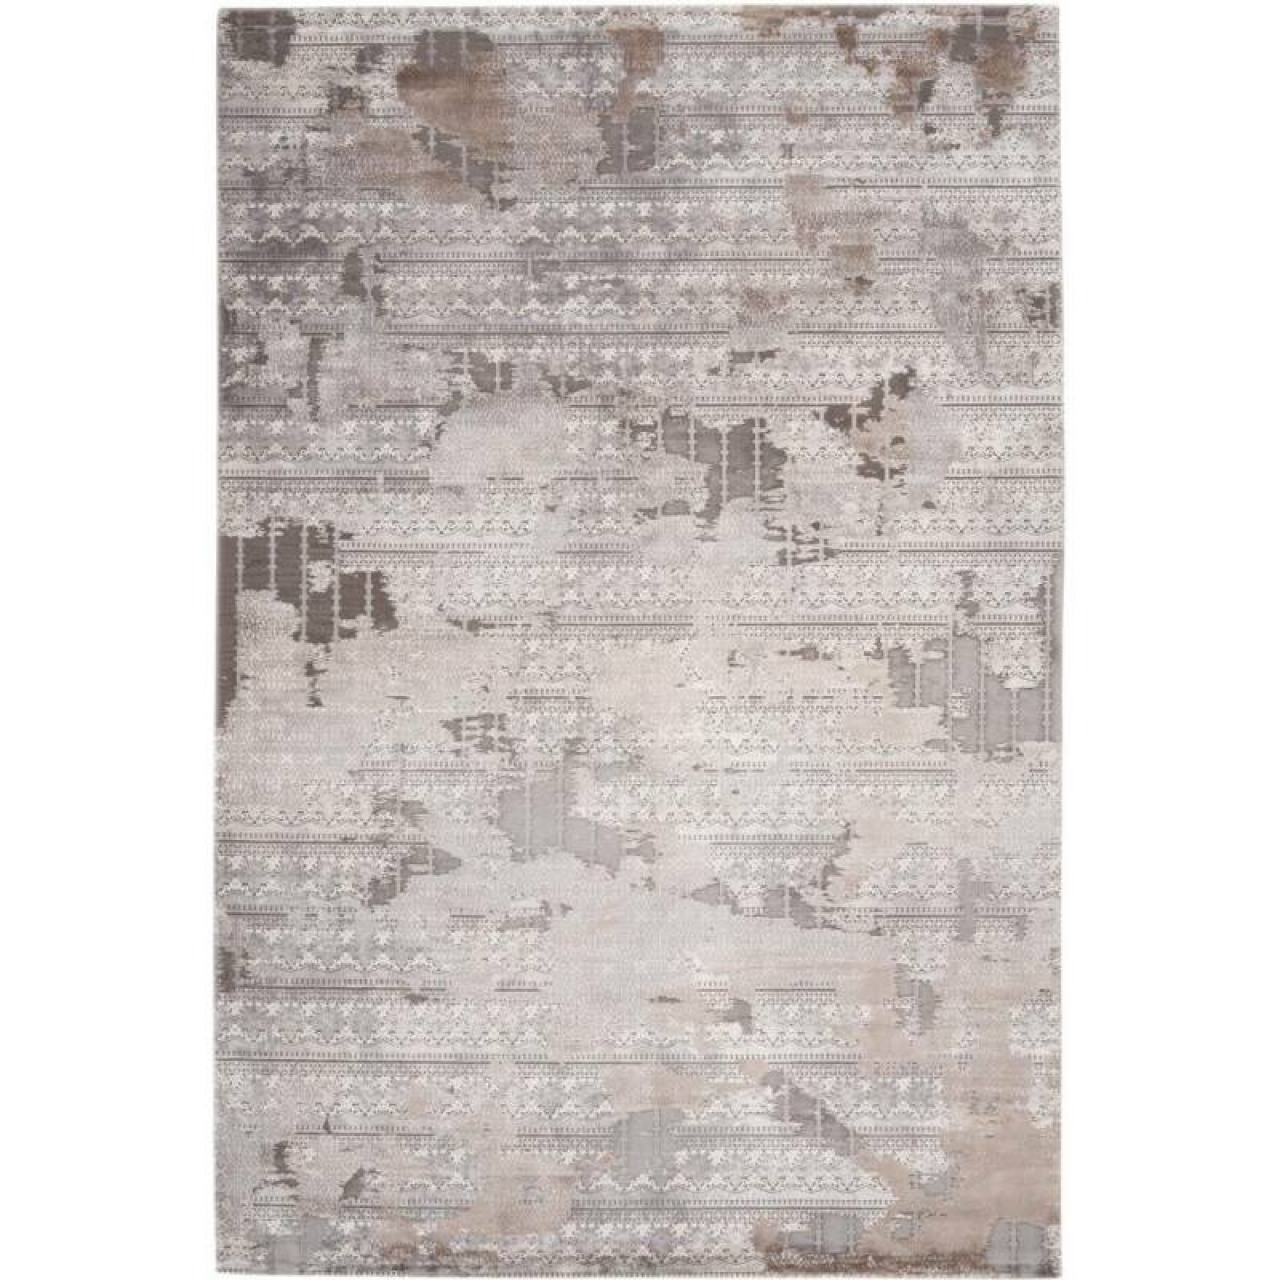 Obsession Haute Couture Jewel 955 Taupe szőnyeg-140x200